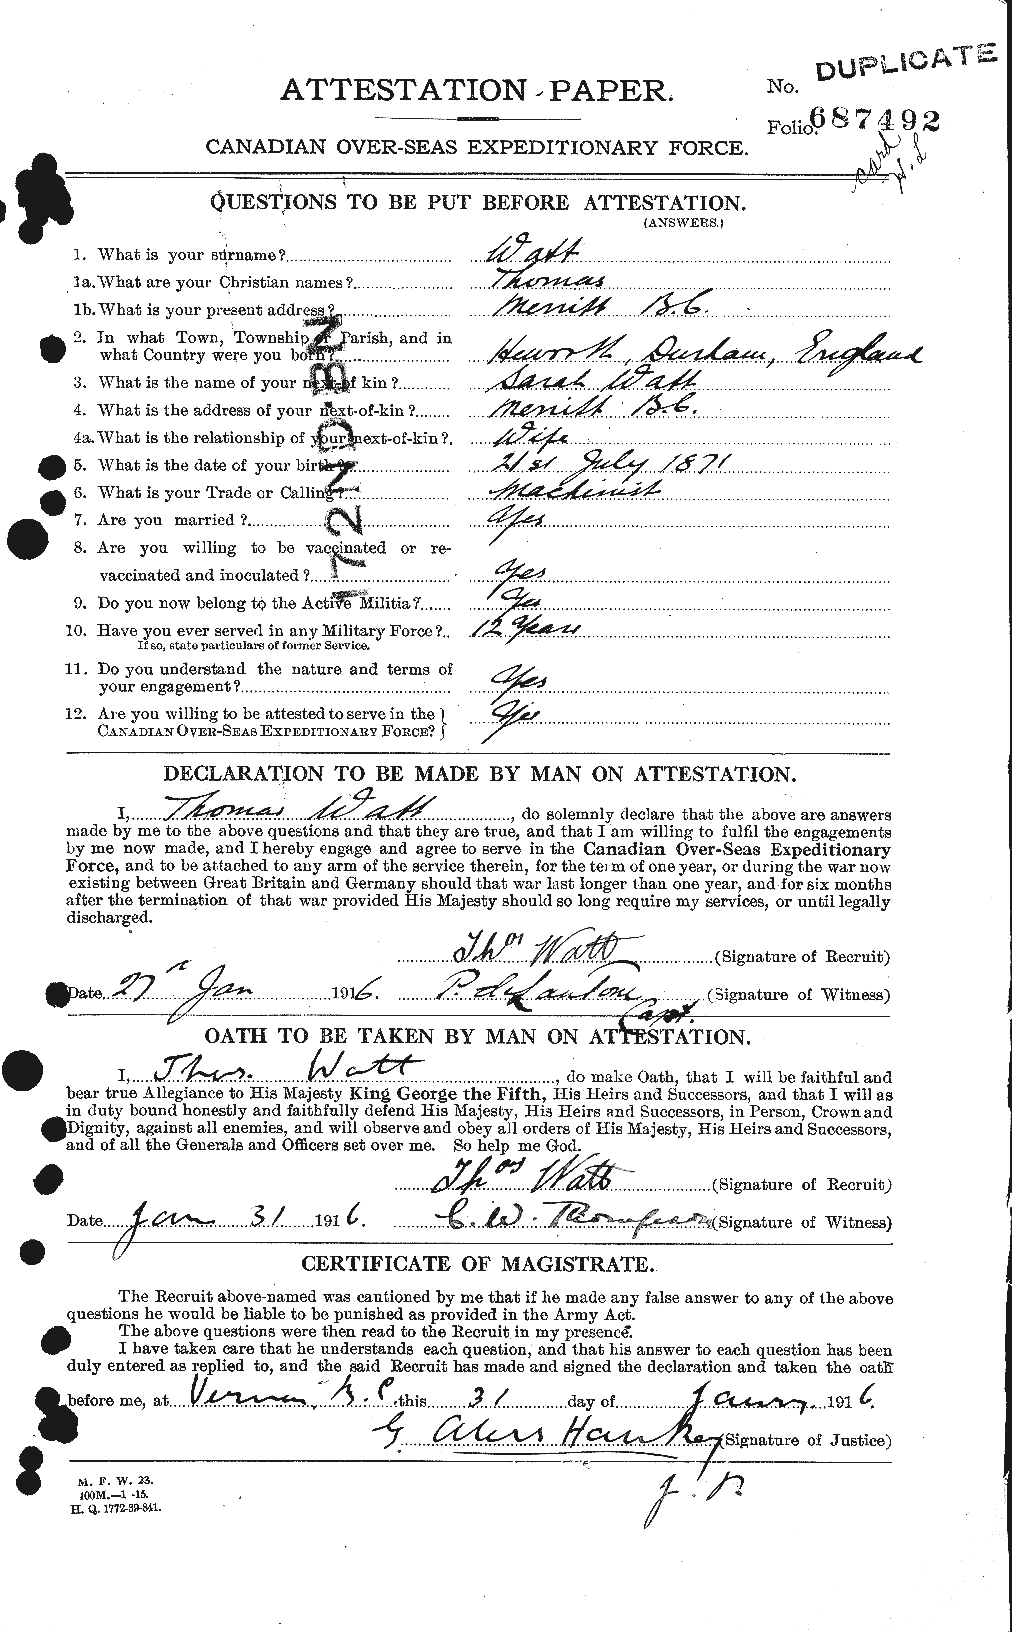 Personnel Records of the First World War - CEF 660541a